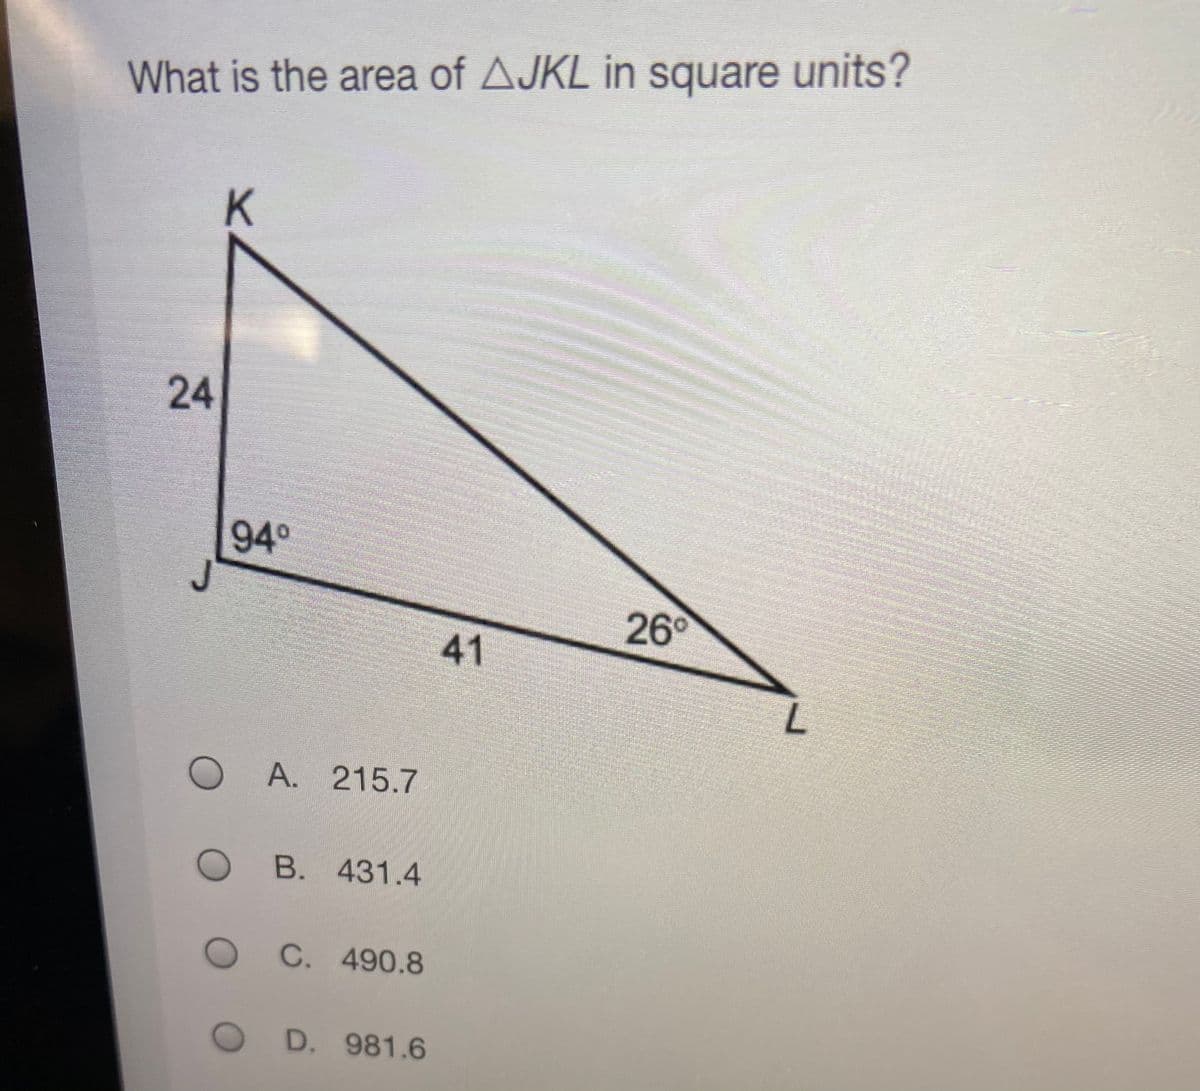 What is the area of AJKL in square units?
K.
24
94°
26°
41
L.
A. 215.7
B. 431.4
C. 490.8
D. 981.6
